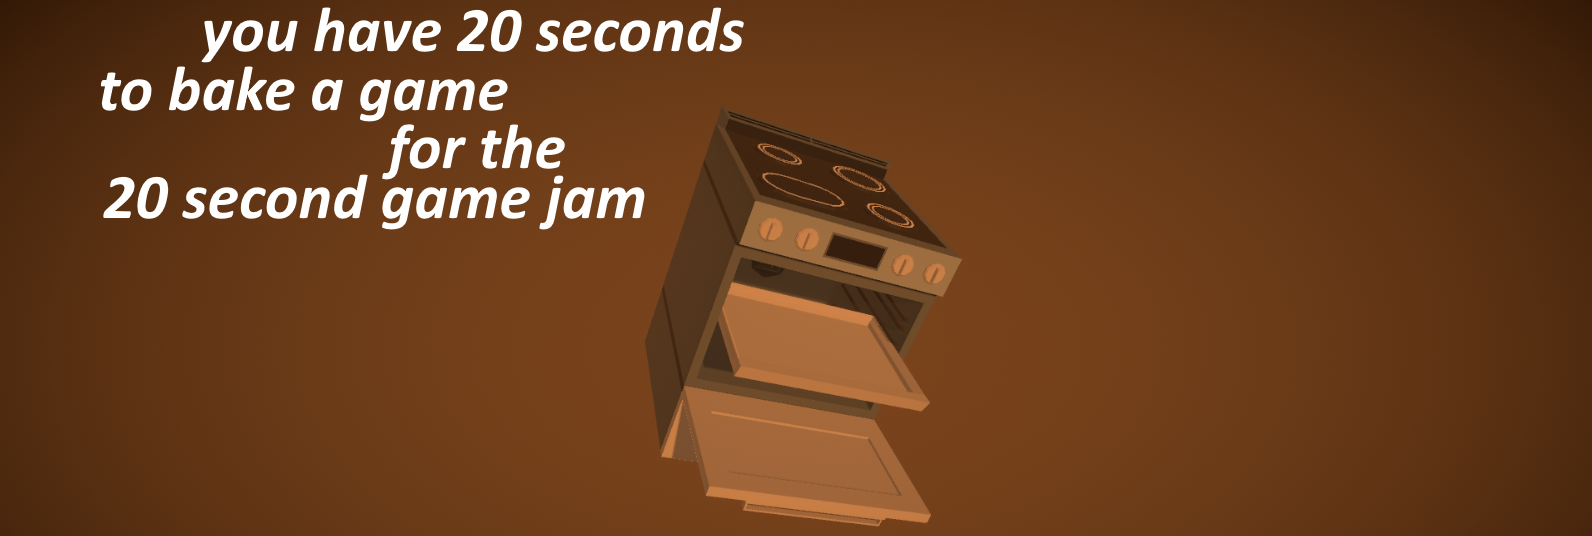 you have 20 seconds to bake a game for the 20 second game jam